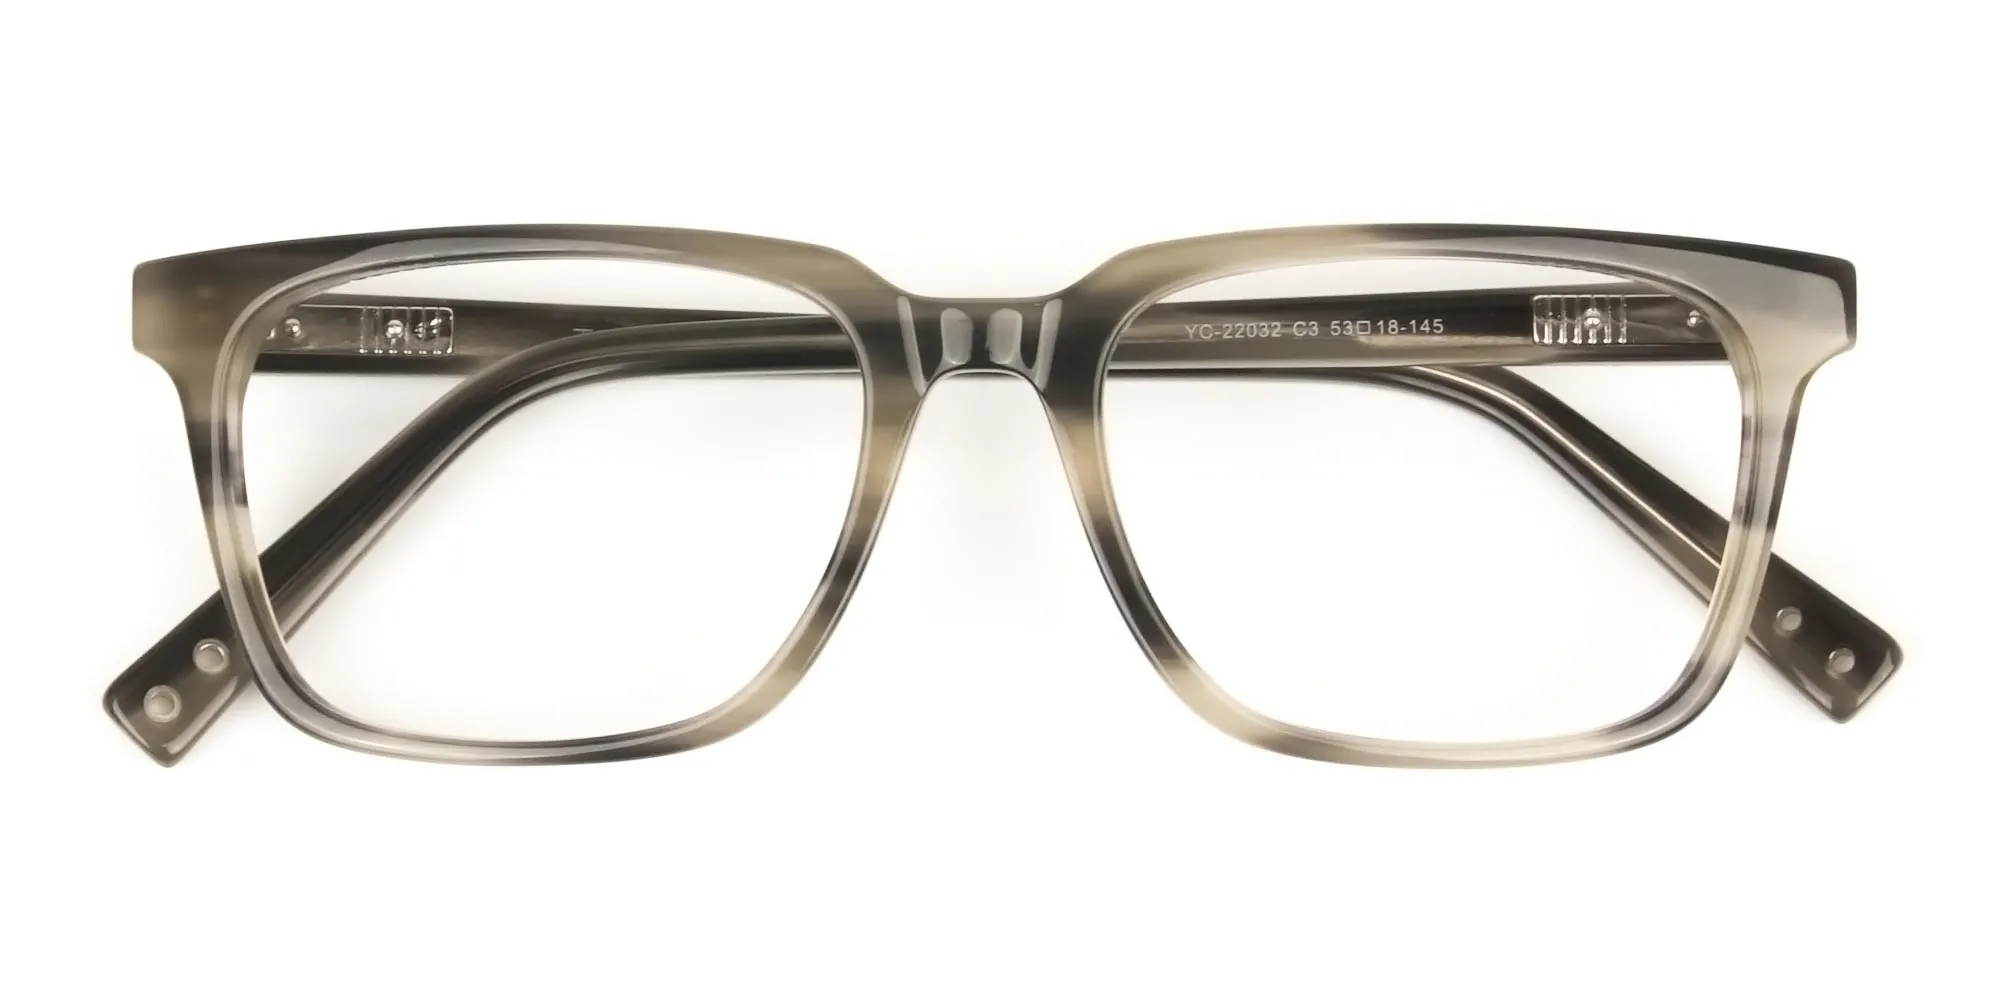 Handcrafted Marble Grey Thick Acetate Glasses in Rectangular - 2